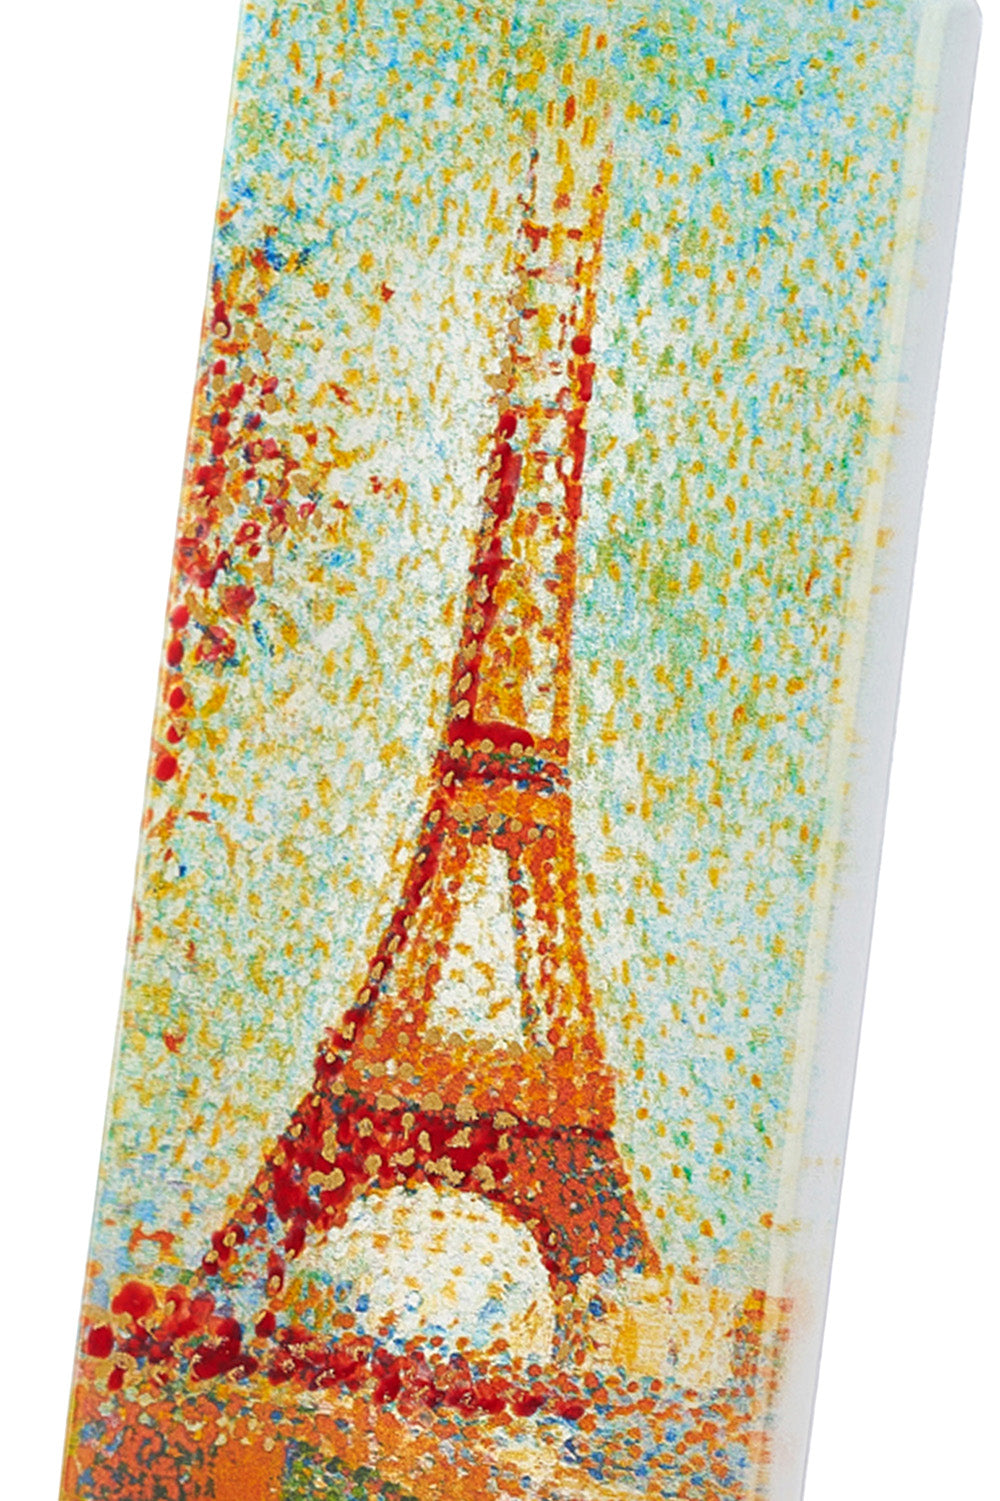 Georges Seurat - The Eiffel Tower